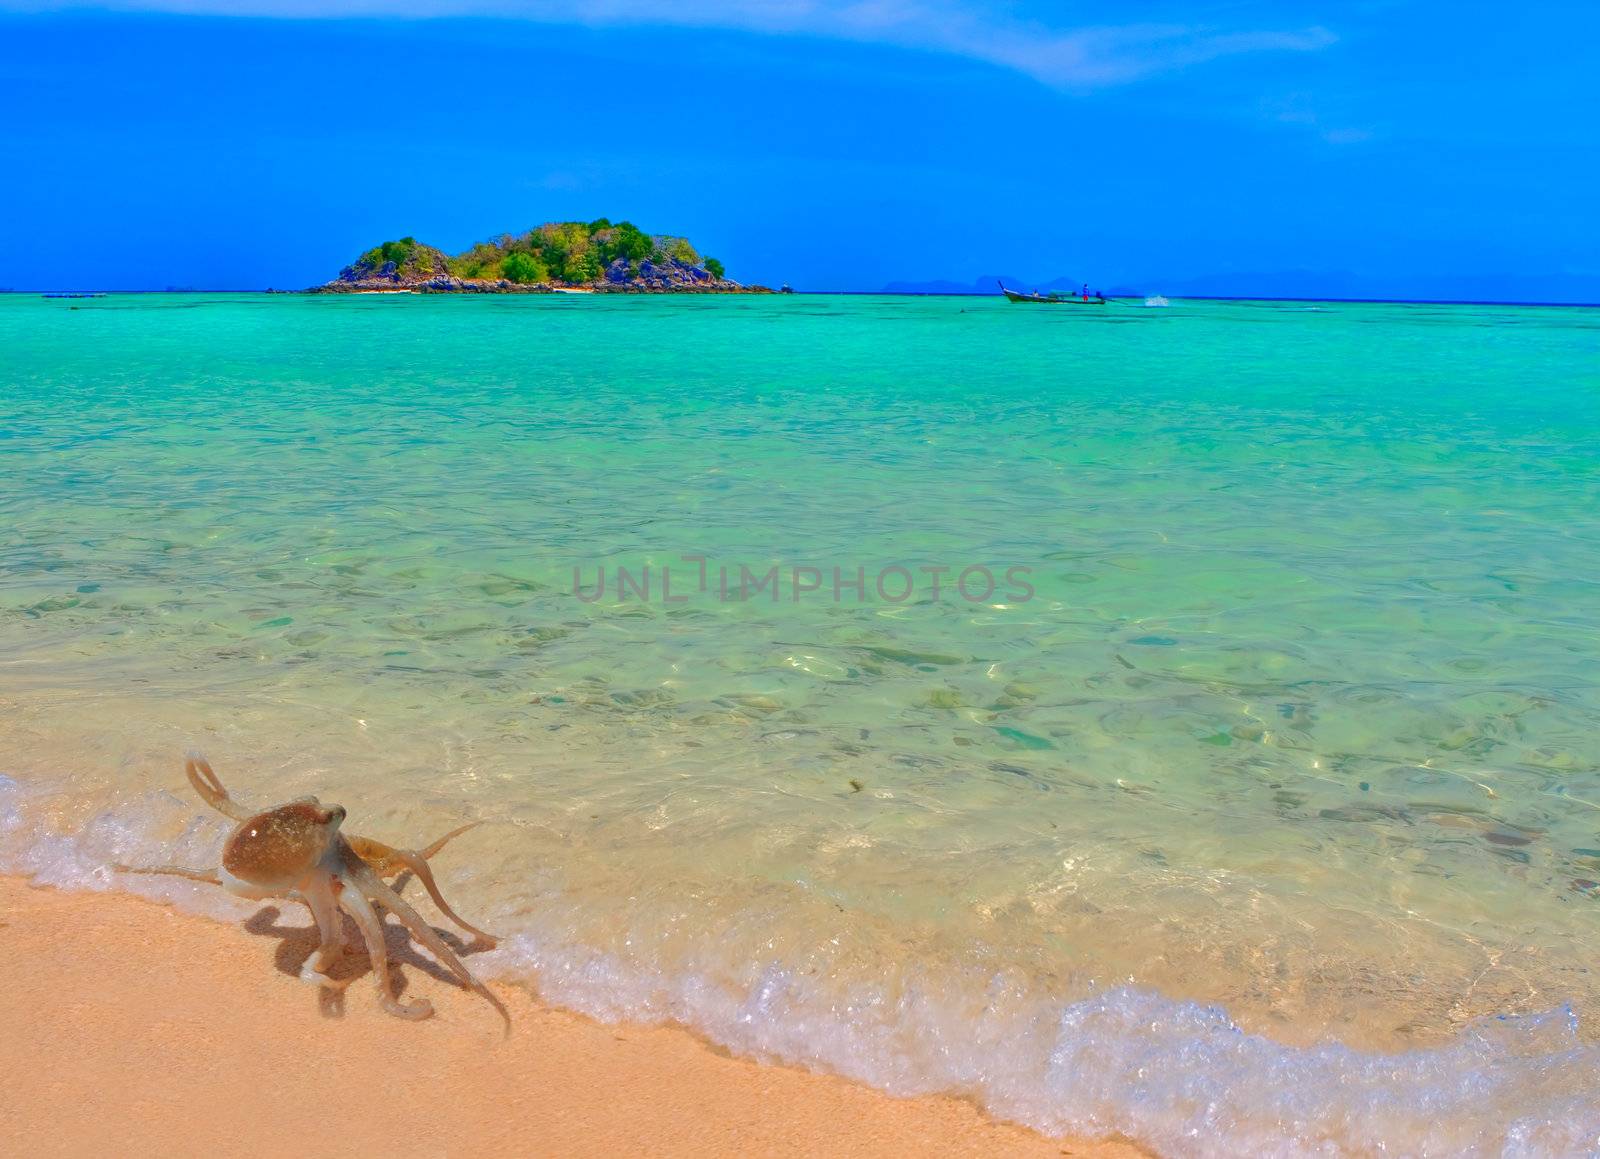 A small octopus coming out of the water at Koh Lipe, Thailand